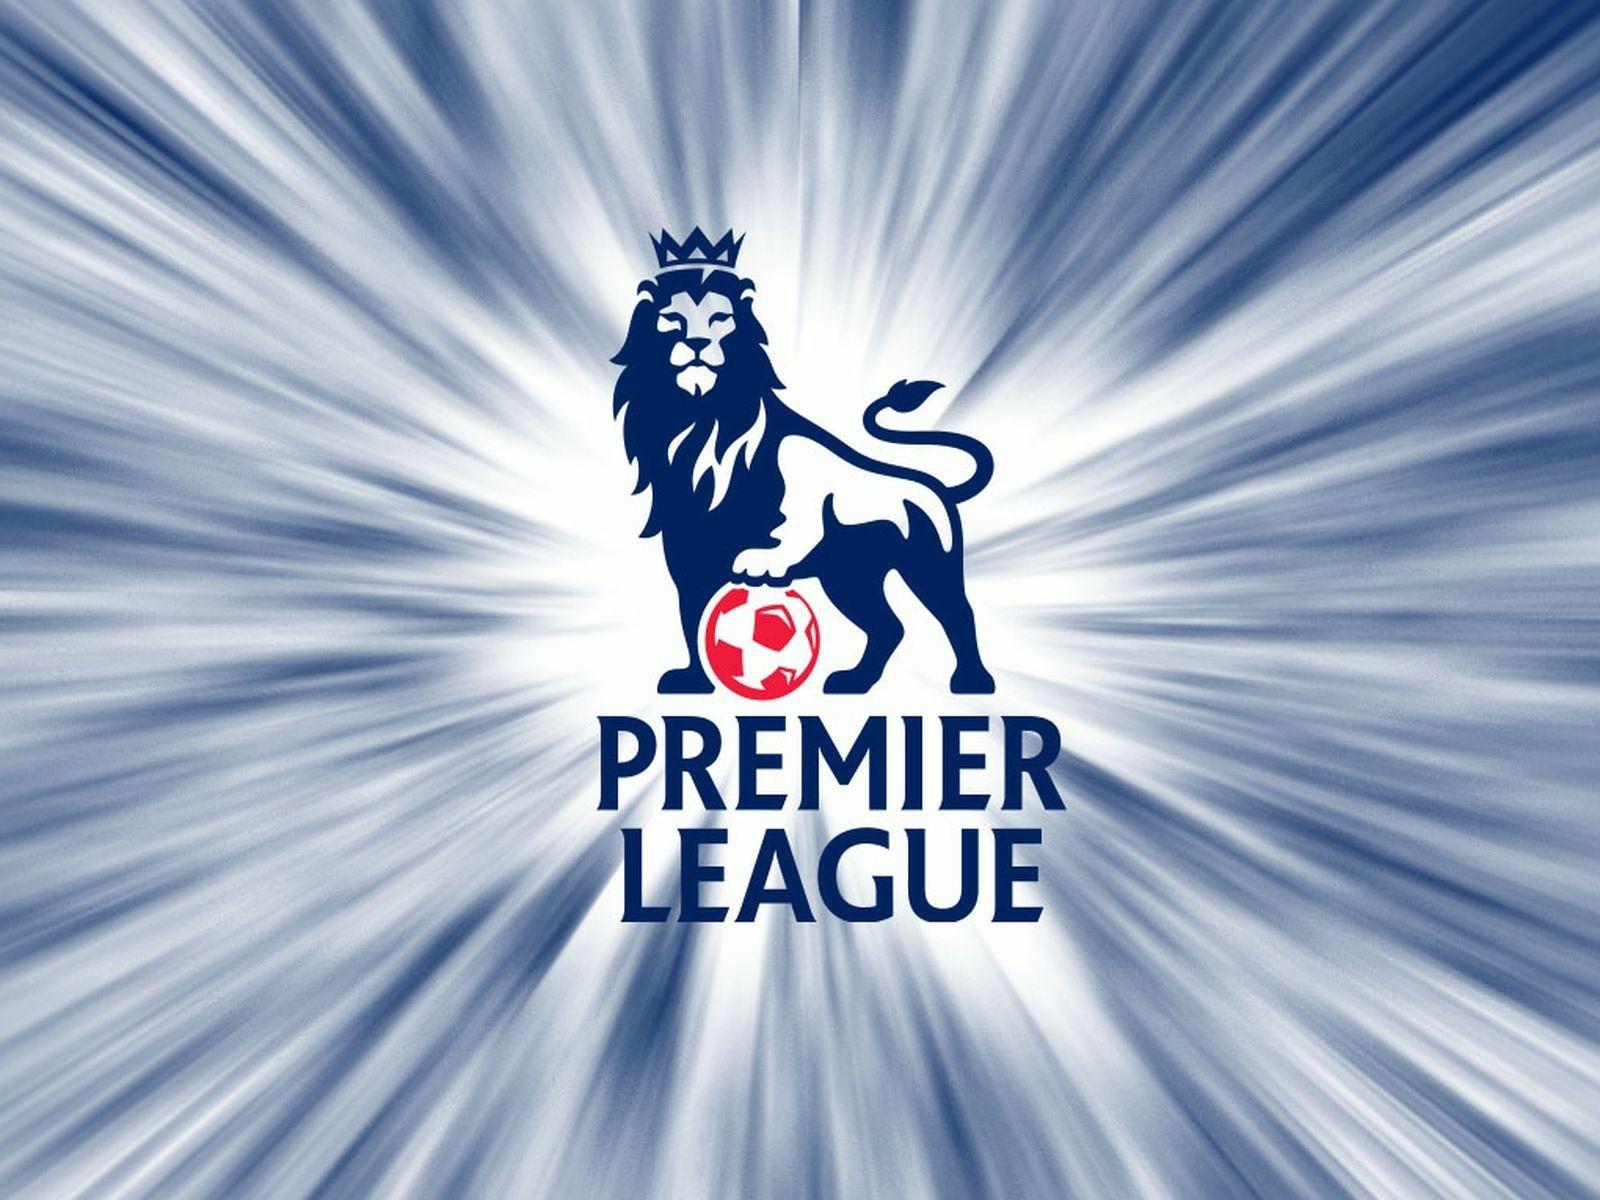 Premier League Football Wallpapers by 2K Wallpapers Daily